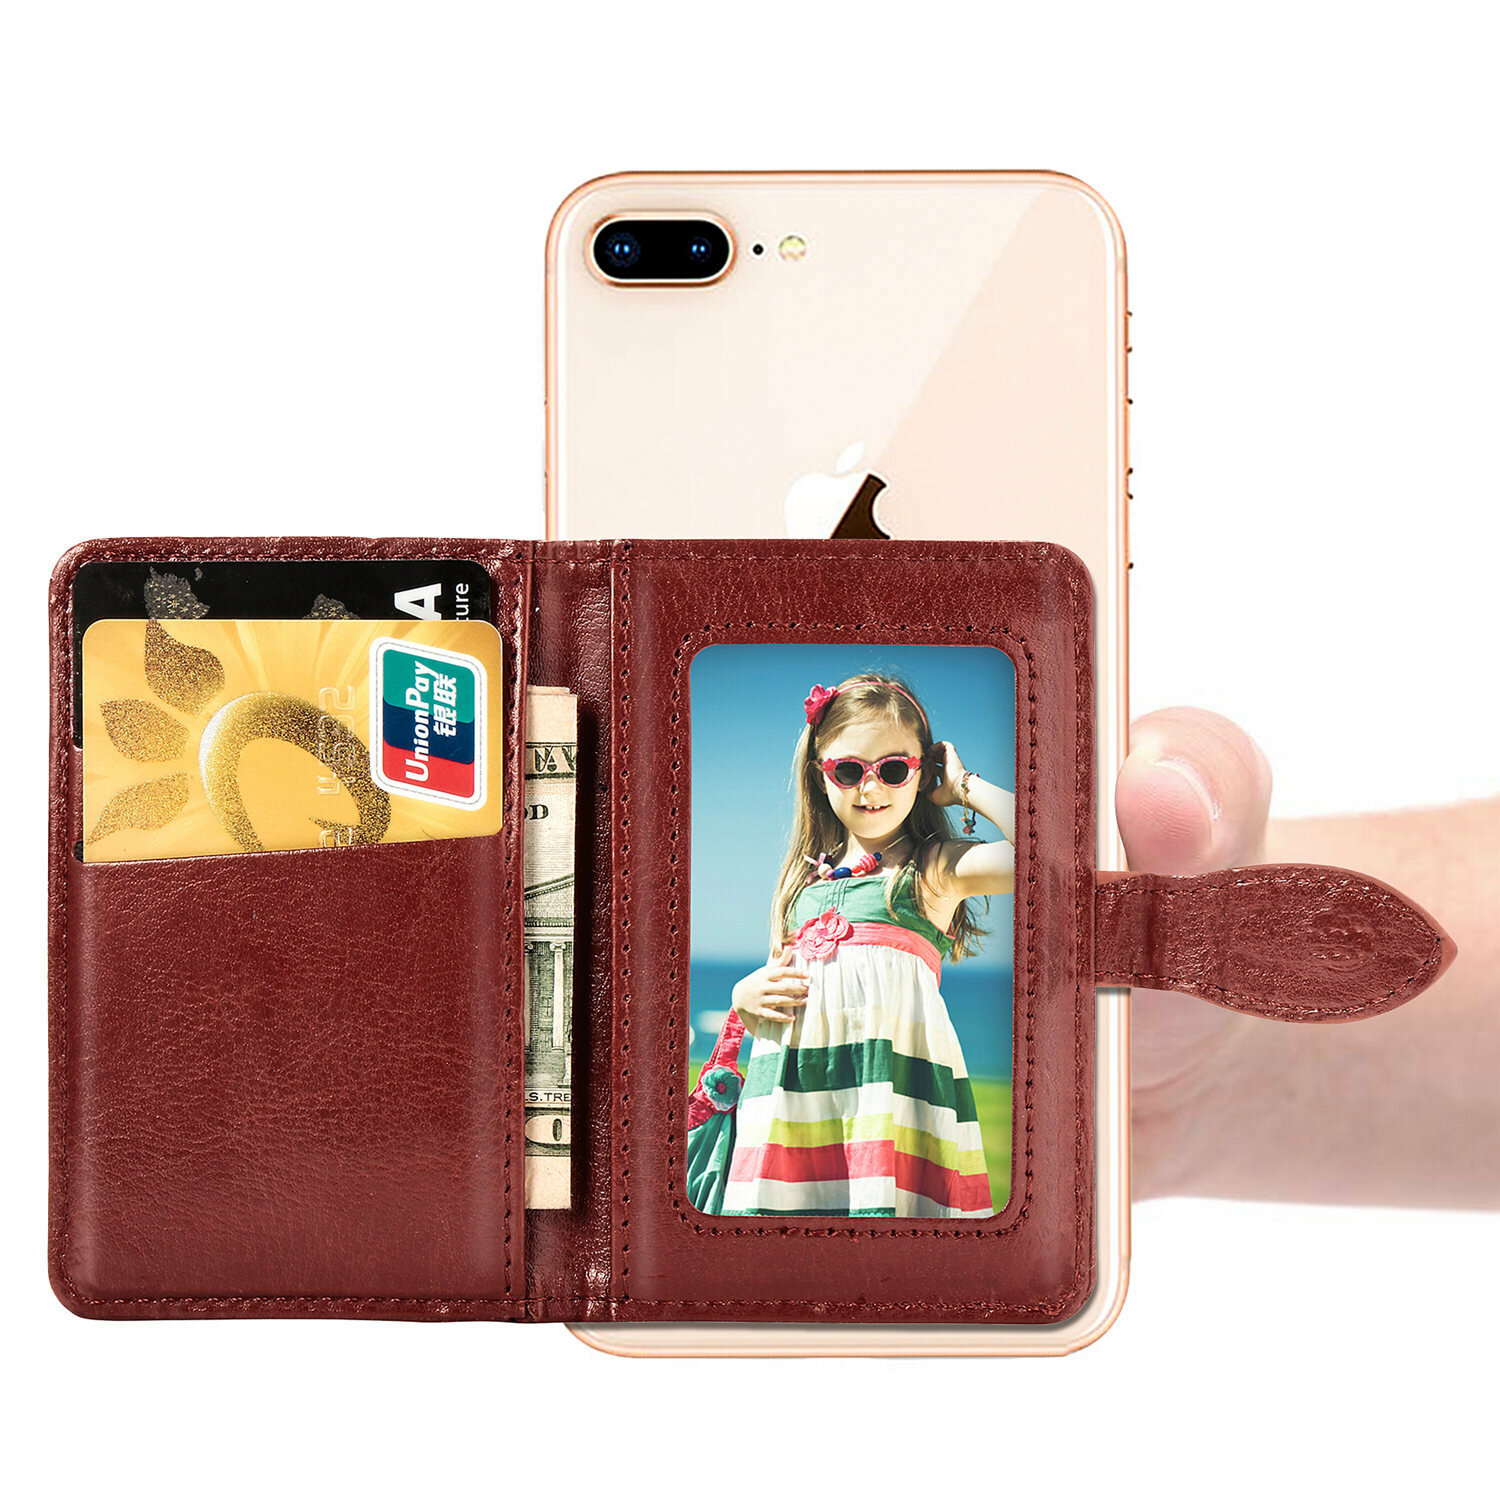 BEFOSPEY Stick On Phone Wallet Business 3M Adhesive Sticker Magnetic Flip PU Leather Credit Card Holder Sleeve Cellphone